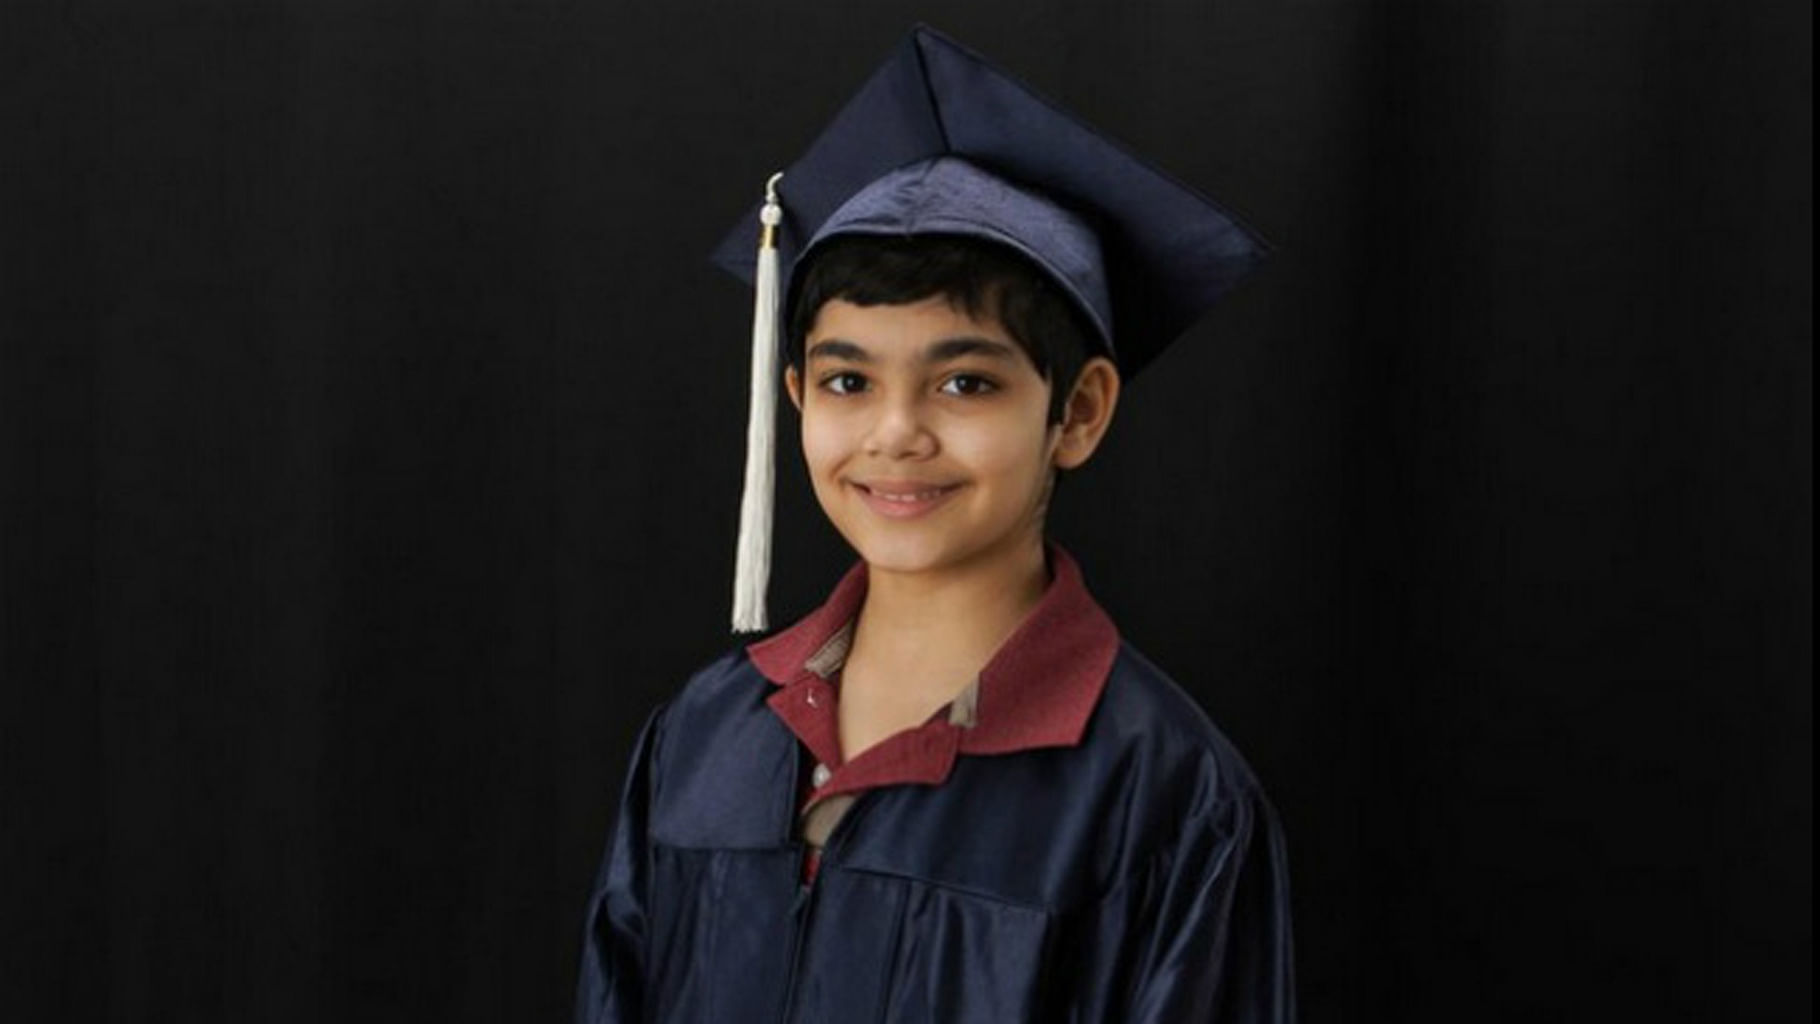 Tanishq Abraham, 12, graduated from American River University at the age of 11. (Photo: Bijou Abraham)